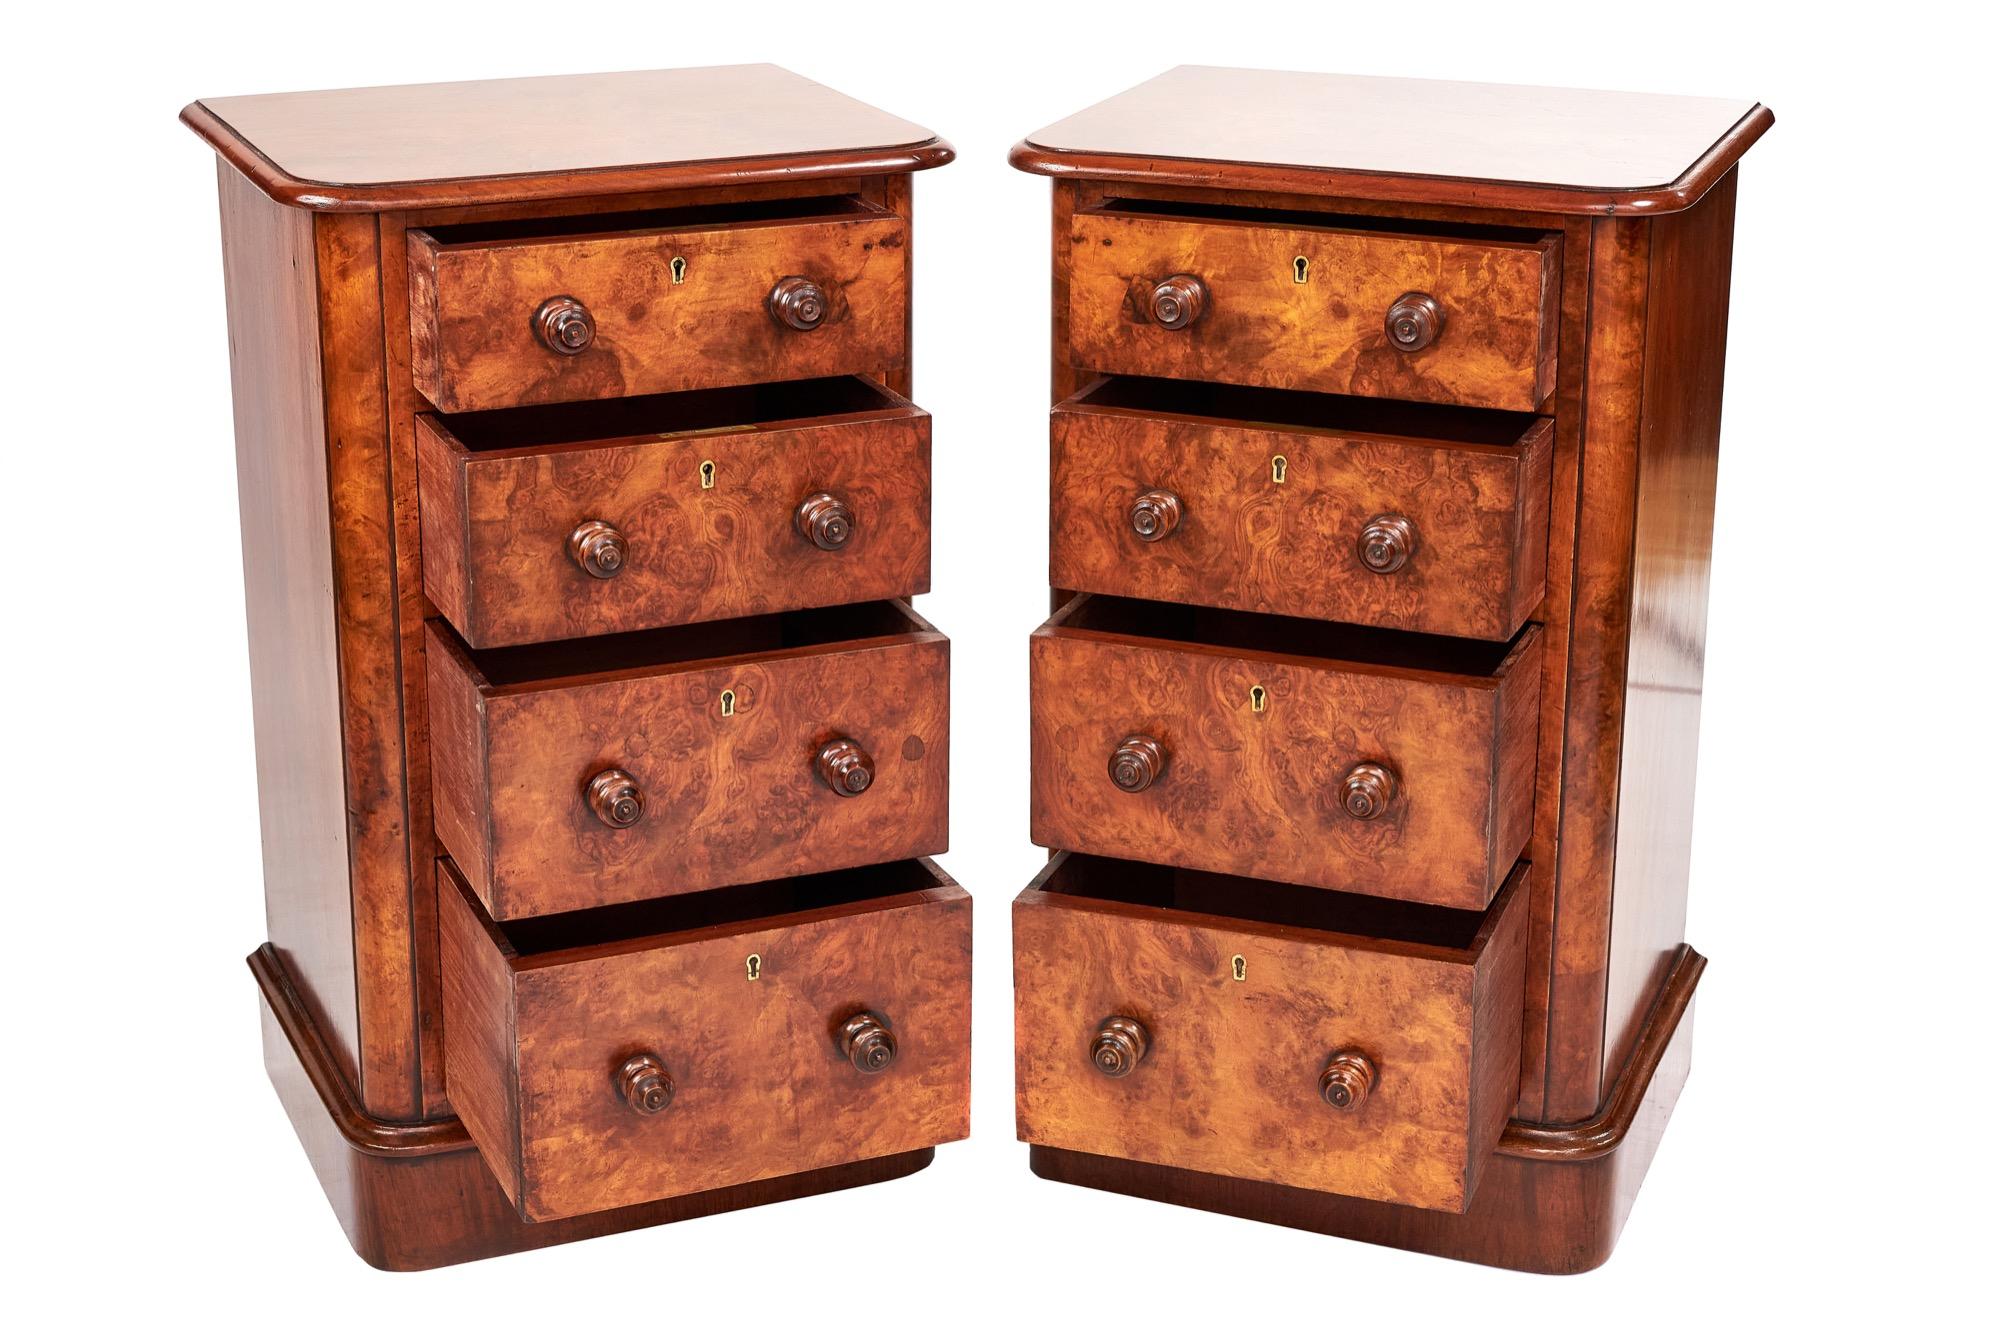 A beautiful pair of Victorian burr walnut antique bedside cupboards/nightstands having very attractive faux drawer fronts and wonderful burr walnut tops. The four faux drawers have turned knobs and original keys which open to reveal a single shelf